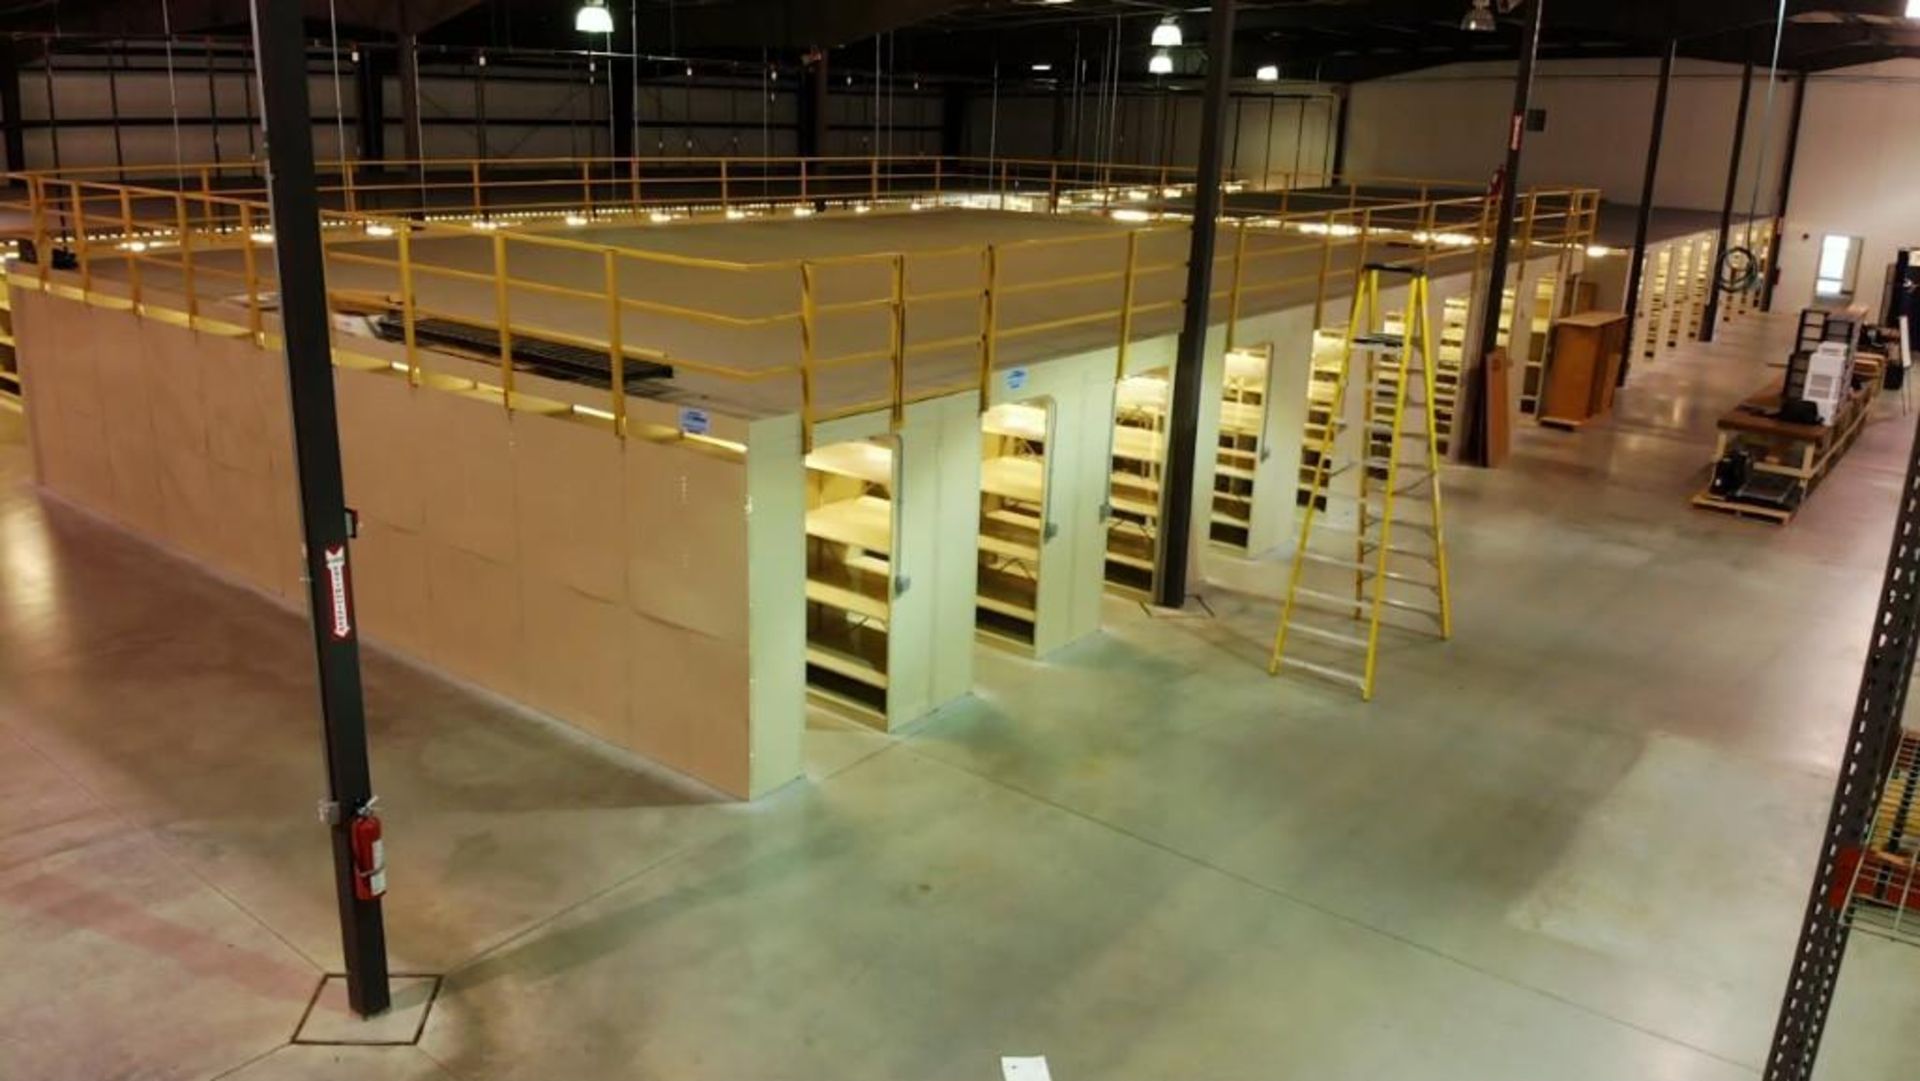 Qty 9 - Sections of shelving: Single shelf dimensions 97" tall X 48 1/32" wide X 21 1/16" deep. - Image 5 of 6